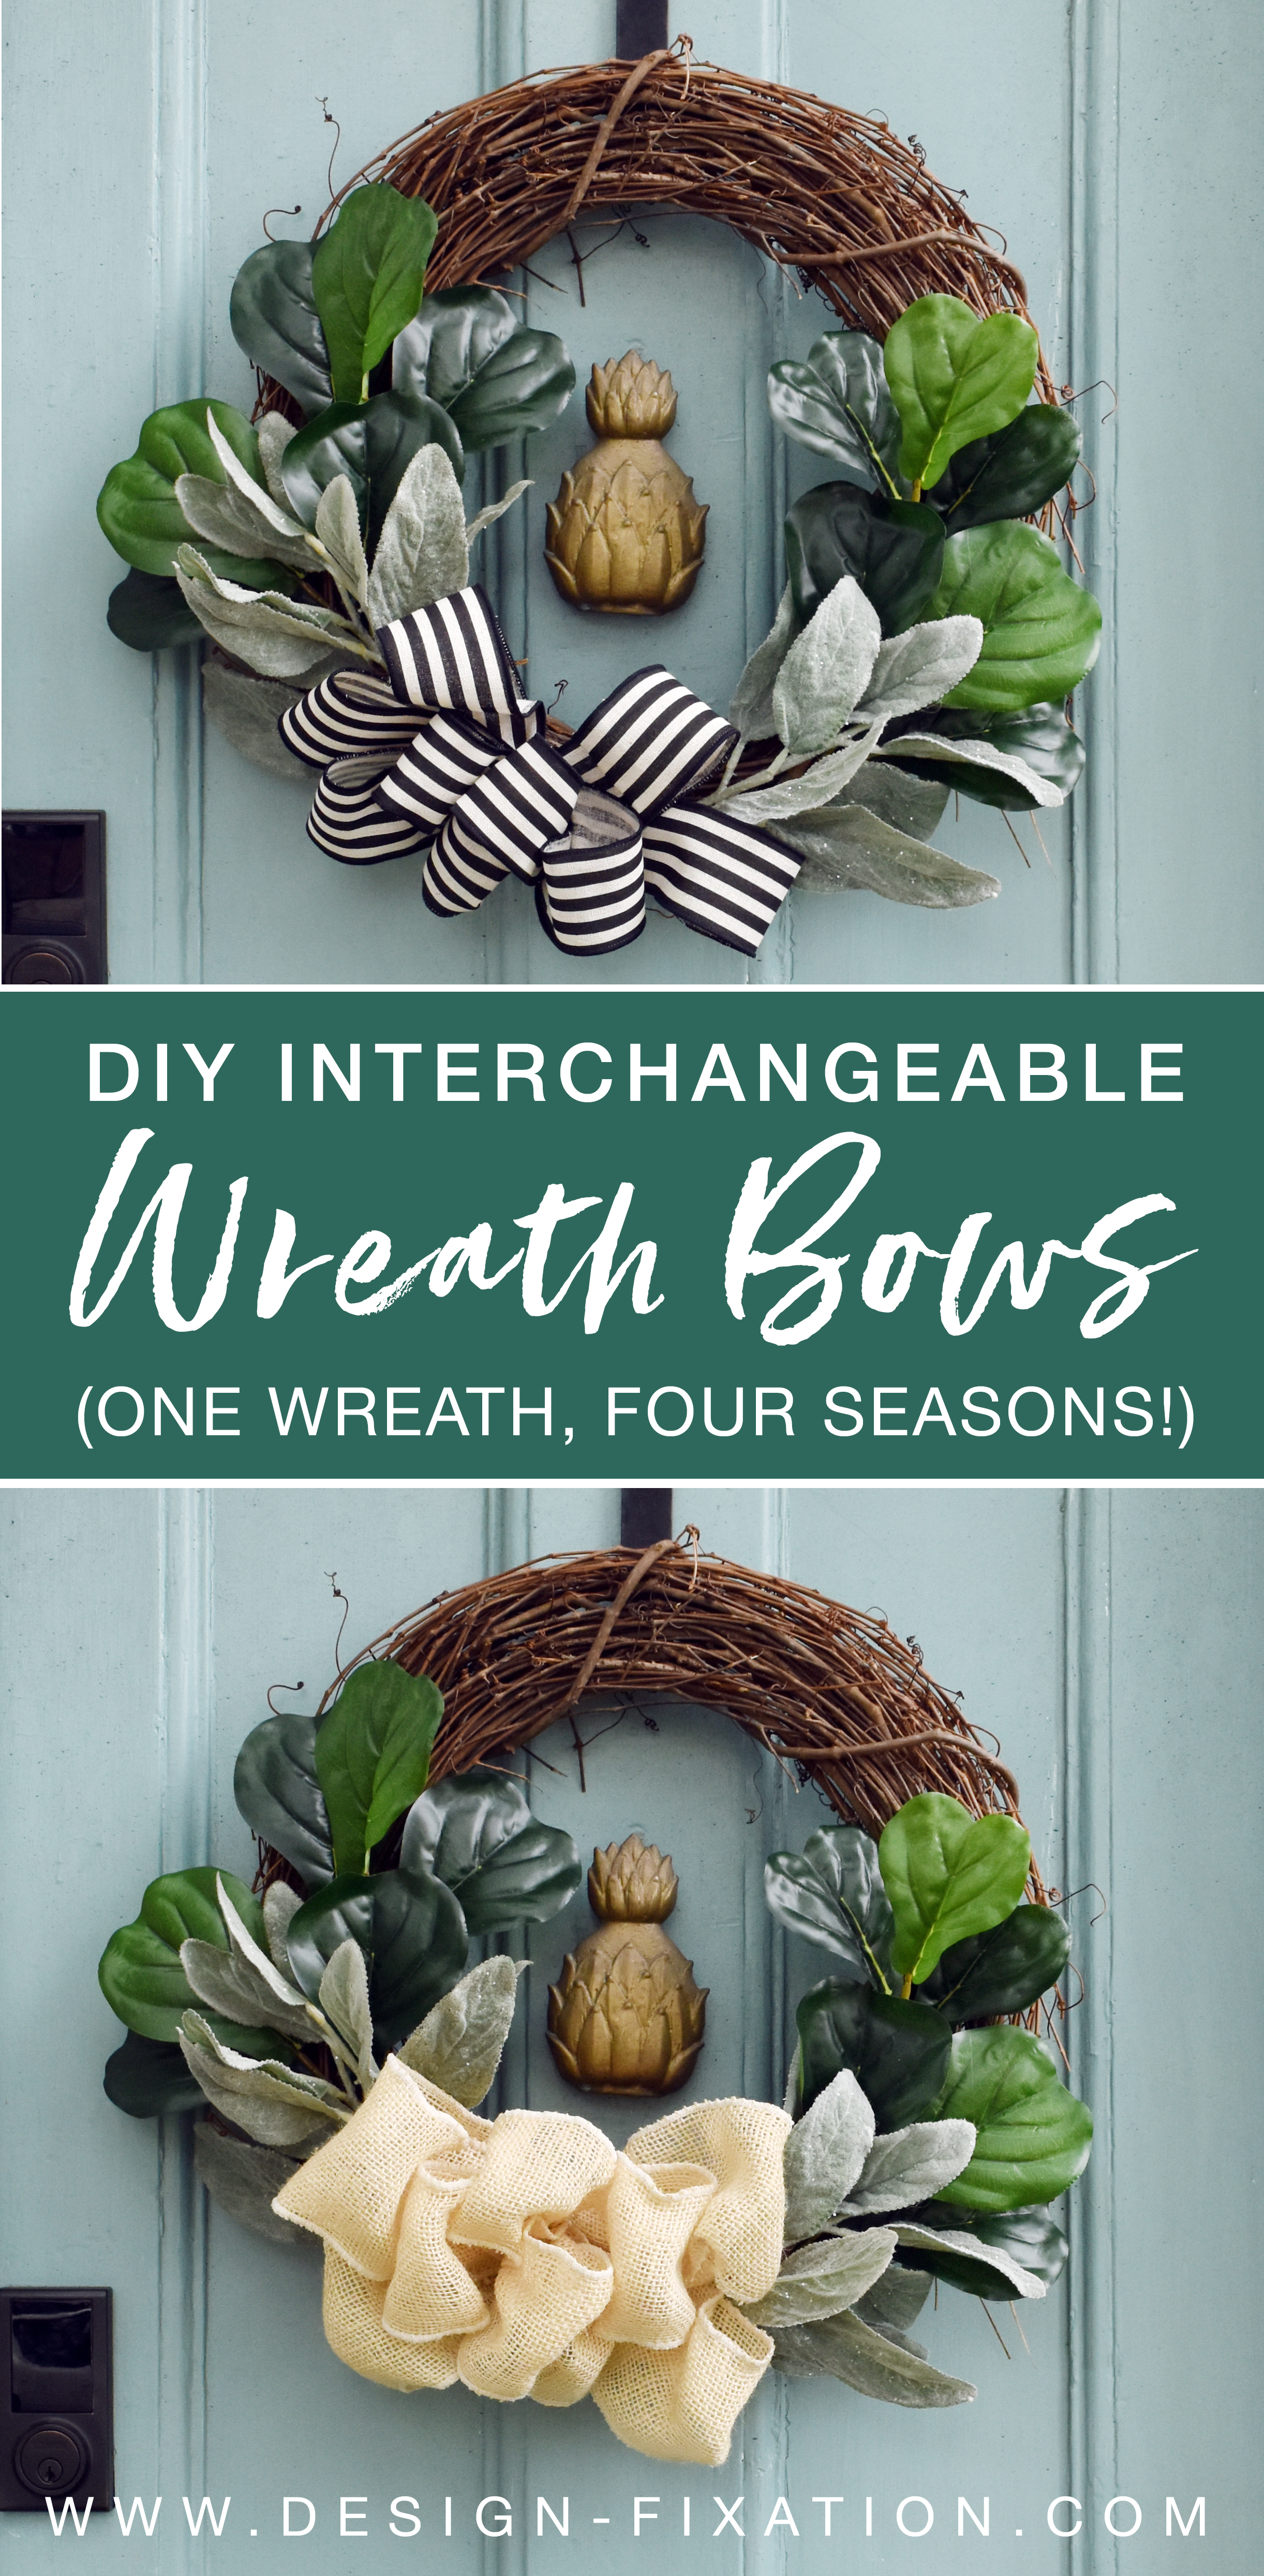 How To Make A Wreath Bow Out Of Ribbon: Interchangeable Wreath Bows For Every Season /// By Design Fixation #diy #simplify #curb_appeal #holiday